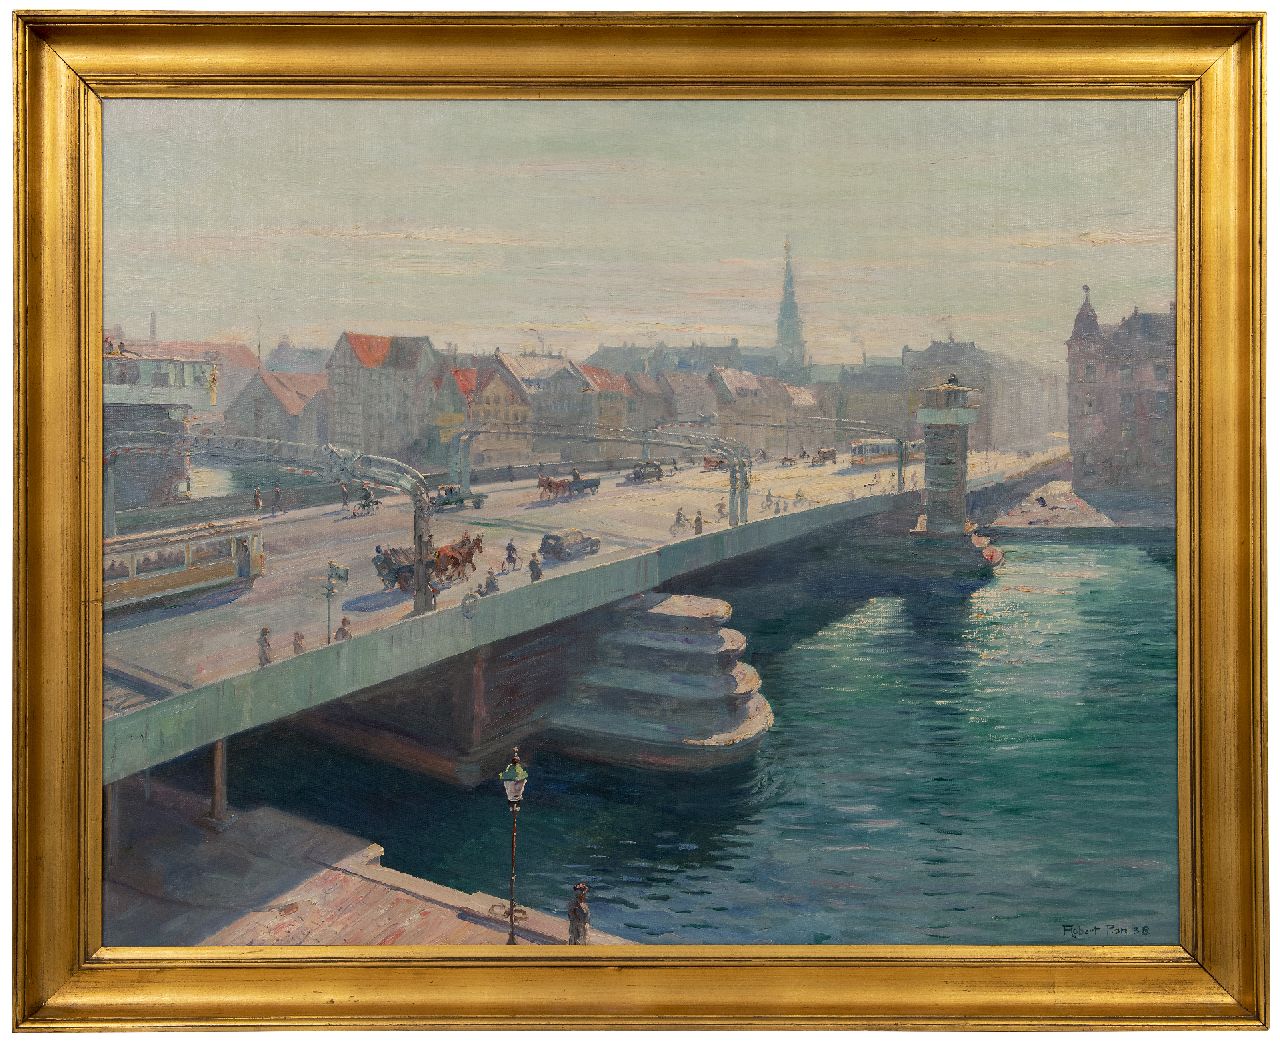 Panitzsch R.  | Robert Panitzsch | Paintings offered for sale | The new Knippelsbro Bridge in Copenhagen, oil on canvas 75.5 x 95.6 cm, signed l.r. and dated '38